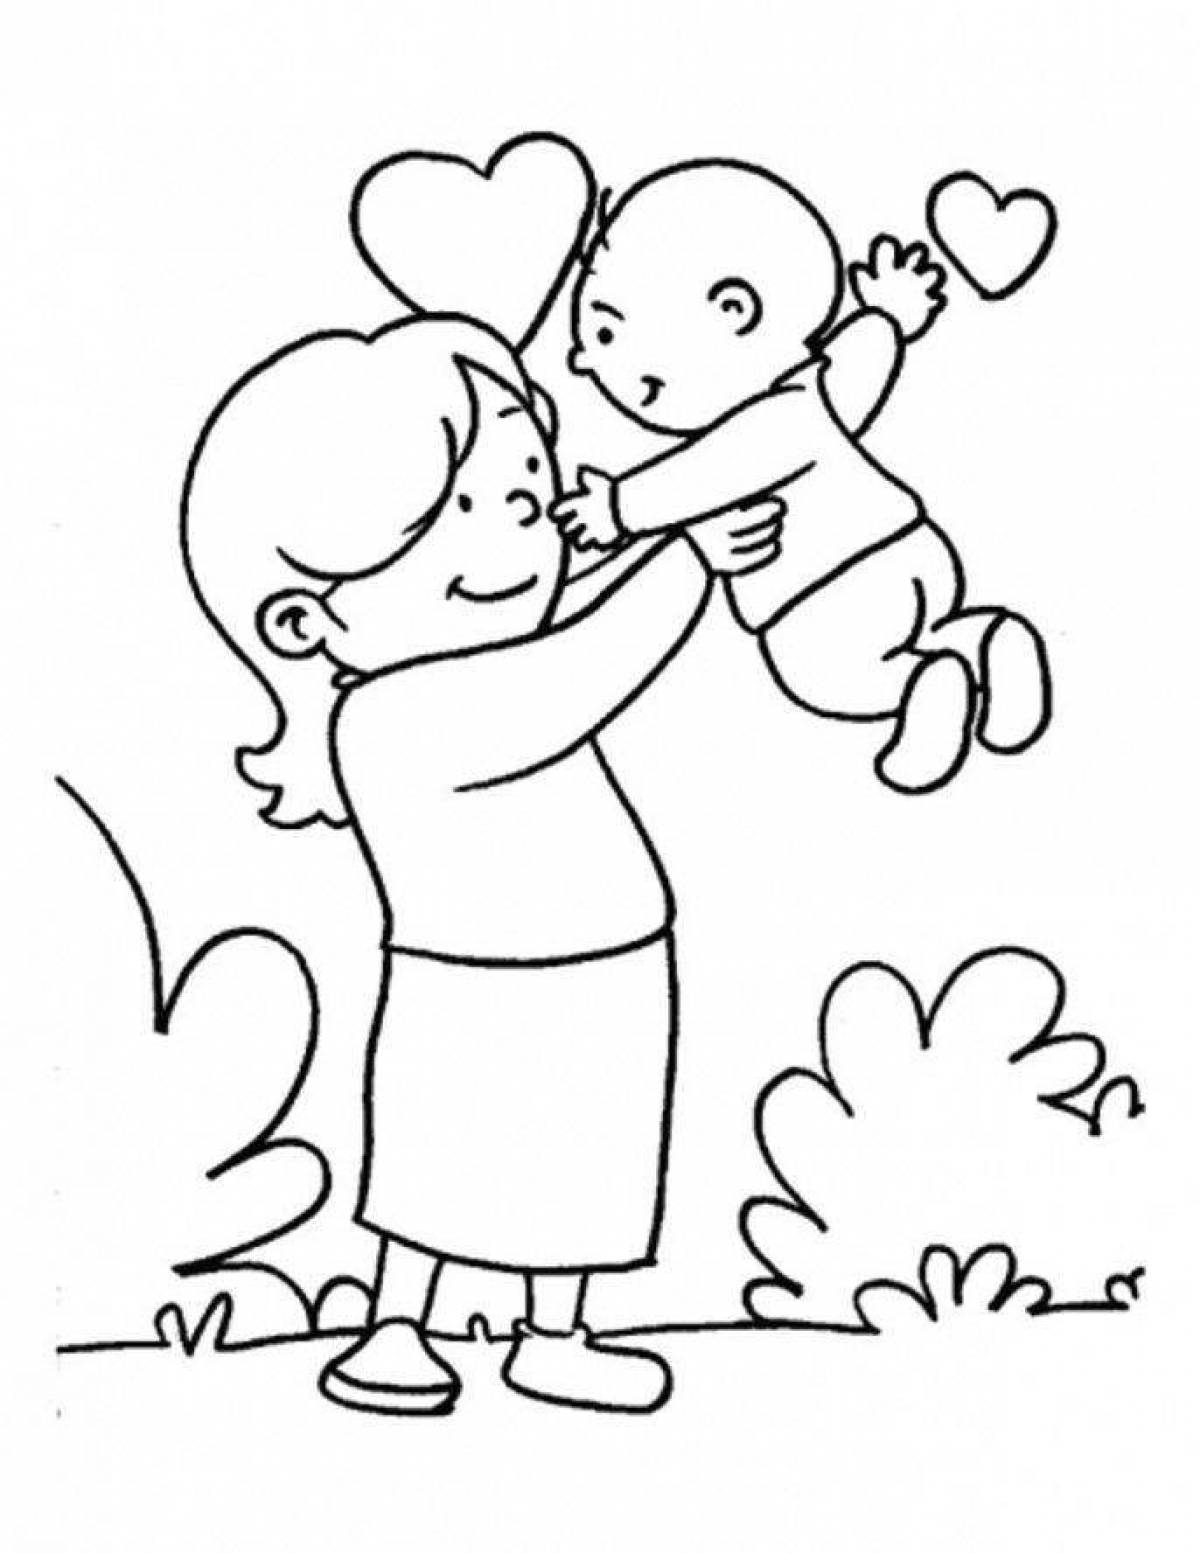 Coloring page shining mom and baby